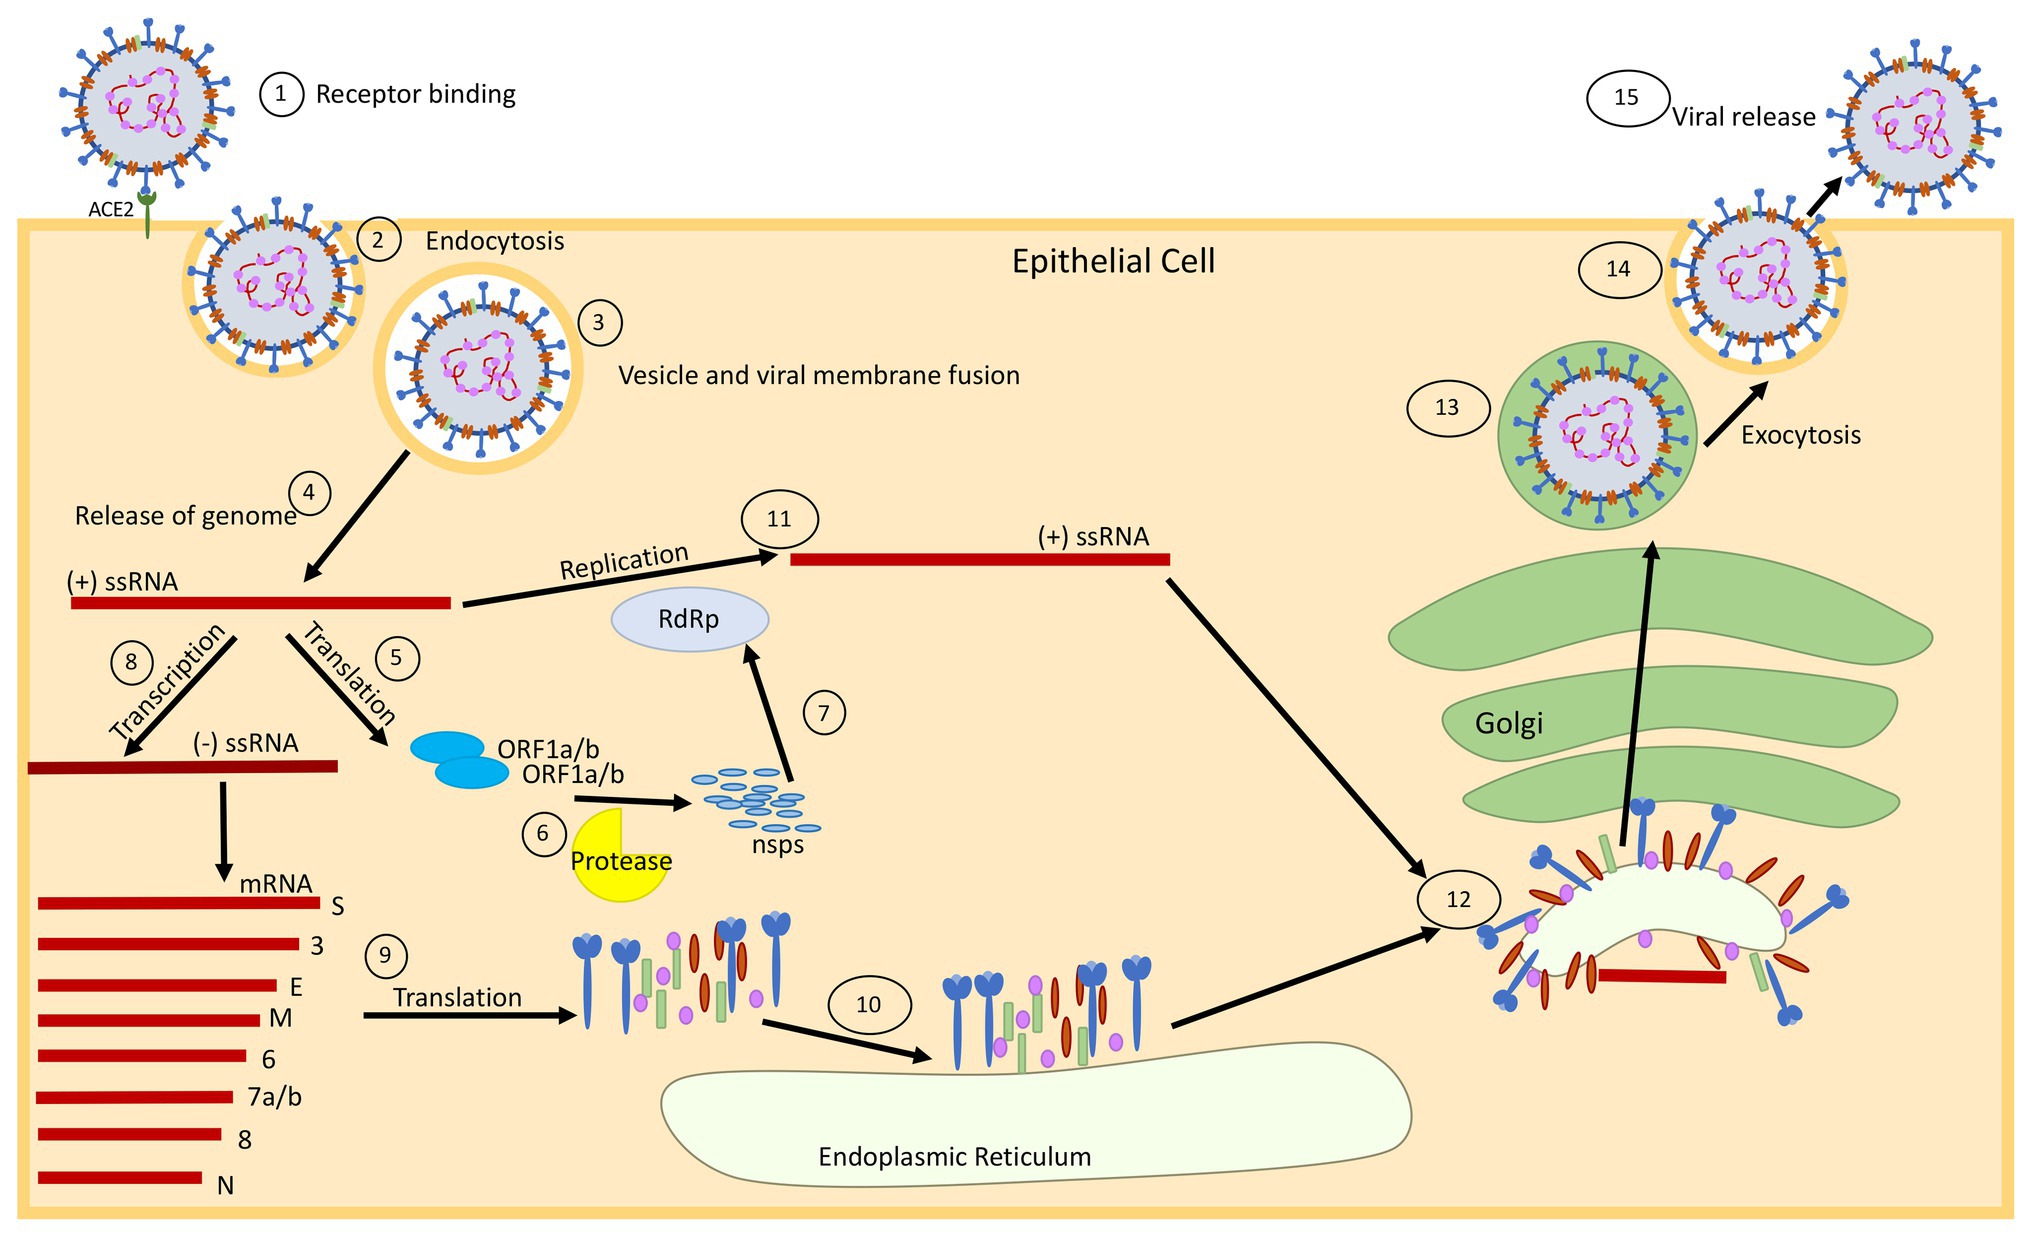 The effects of Nelfinavir on ER stress, metabolic stress and autophagy